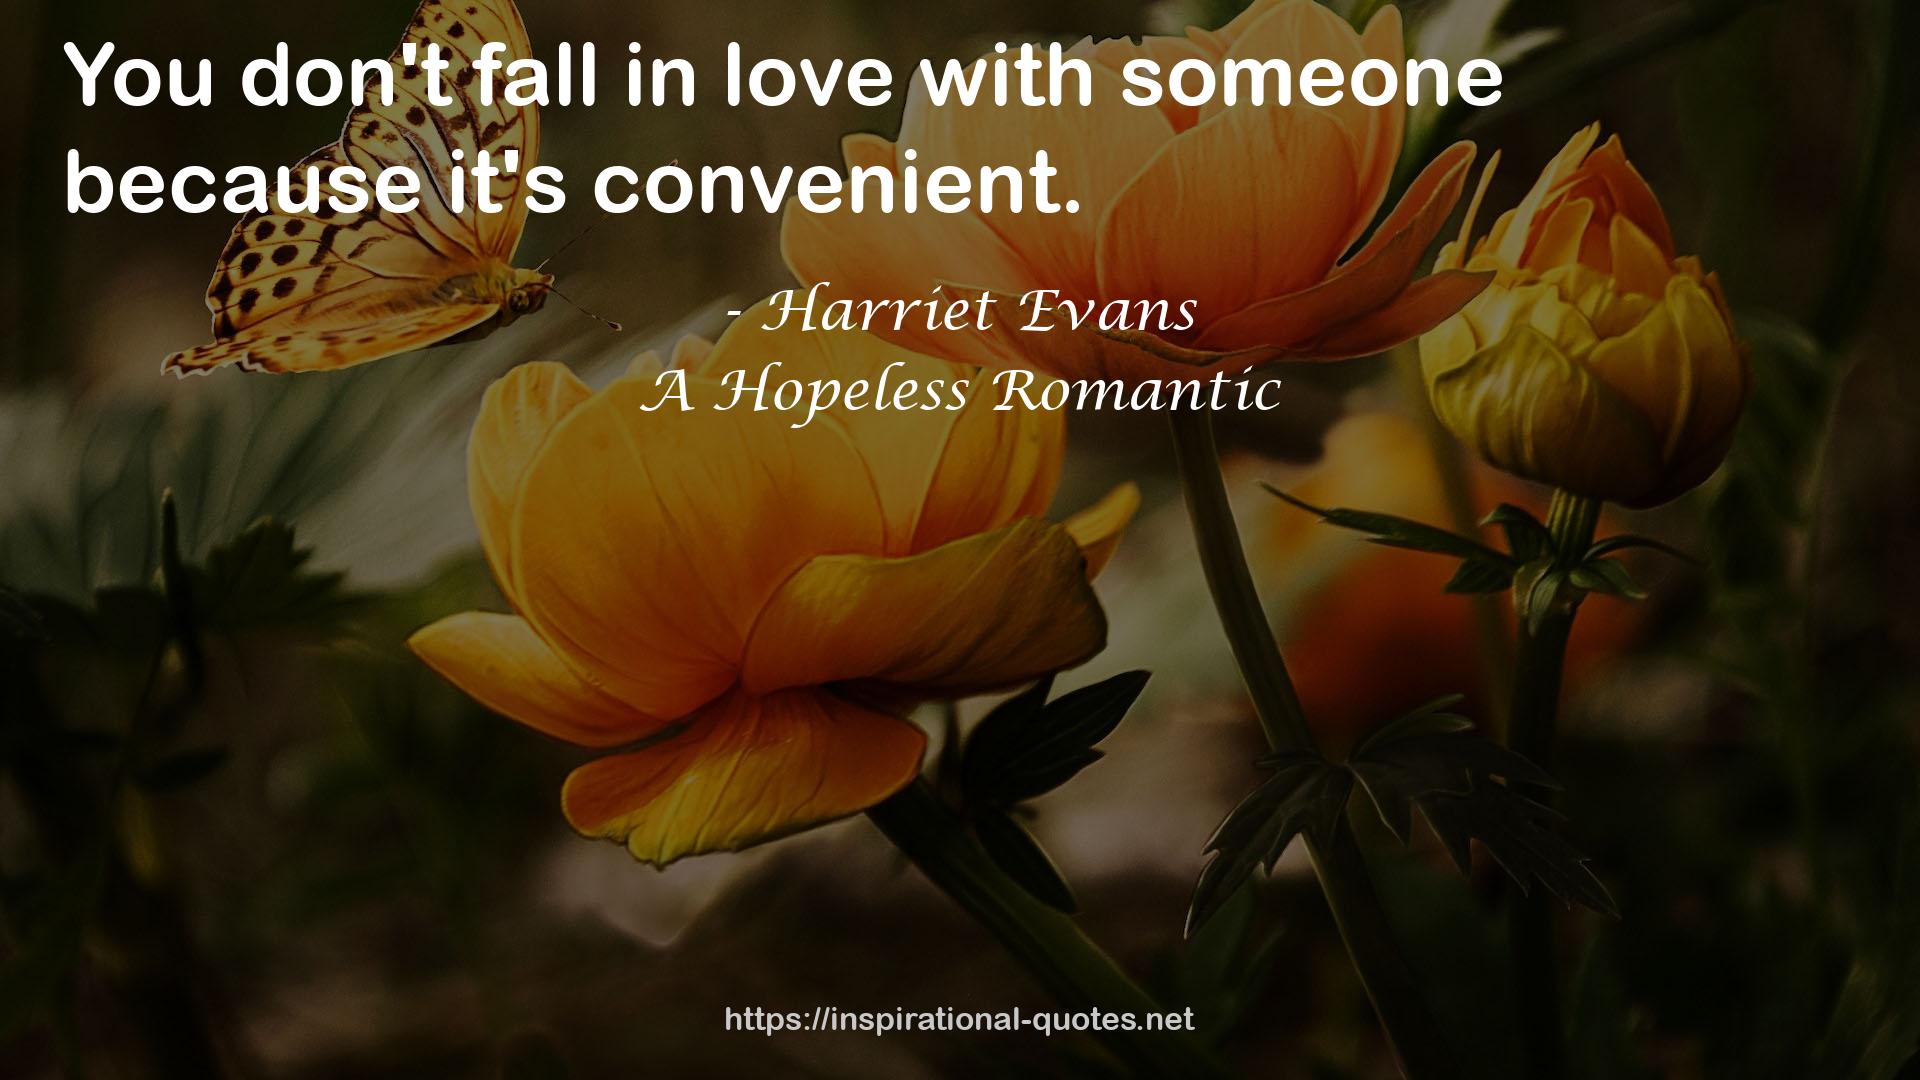 A Hopeless Romantic QUOTES